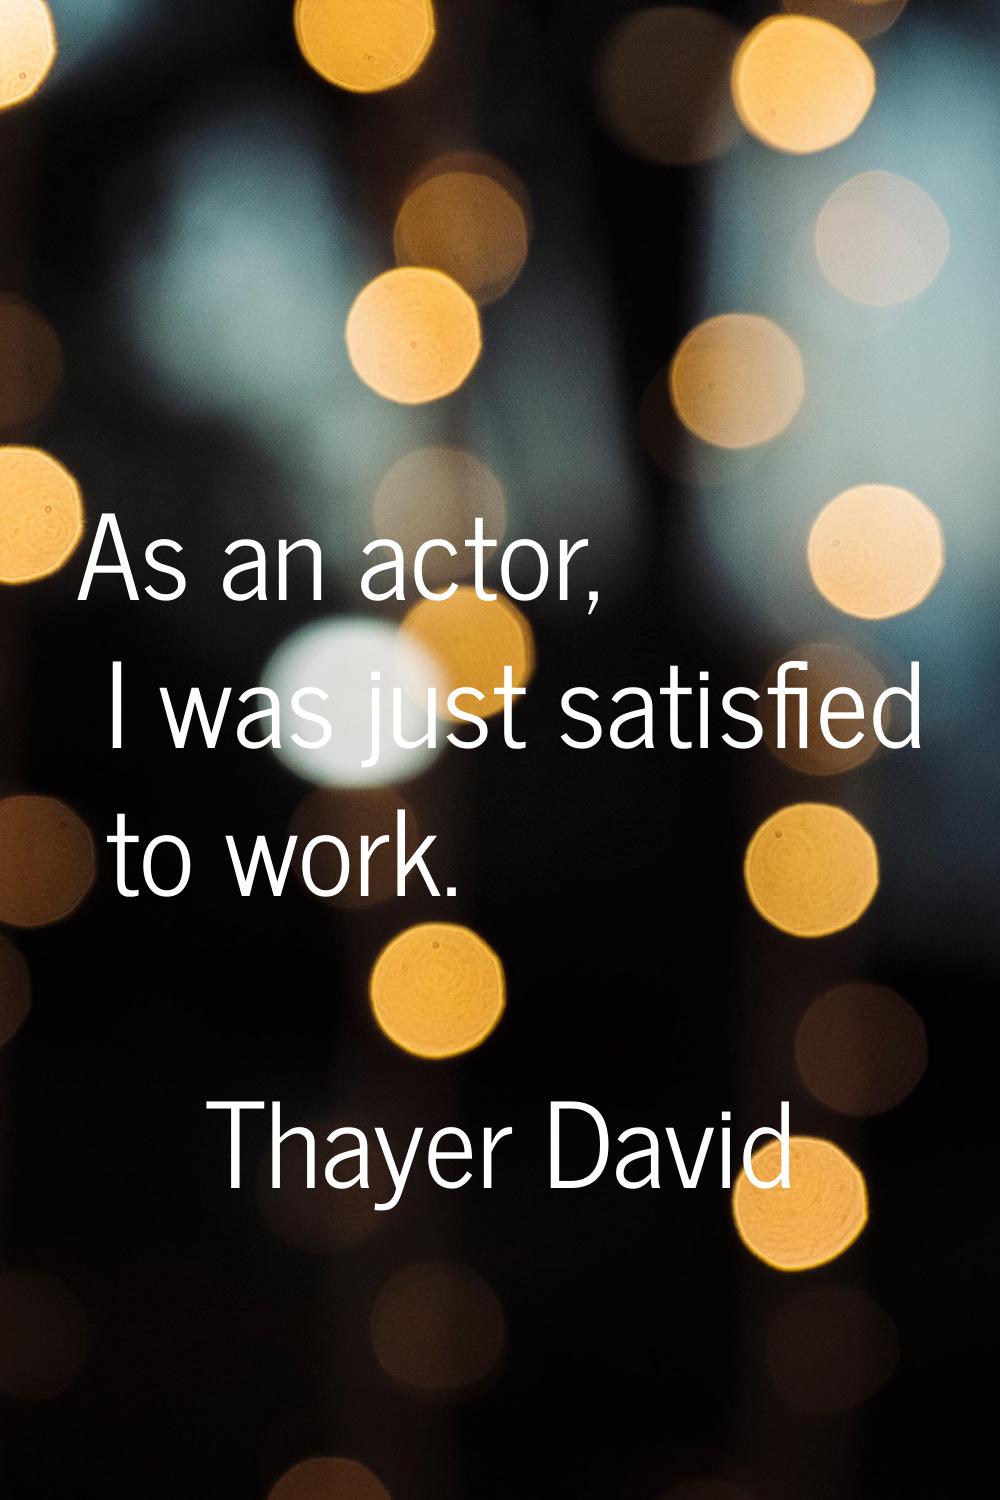 As an actor, I was just satisfied to work.